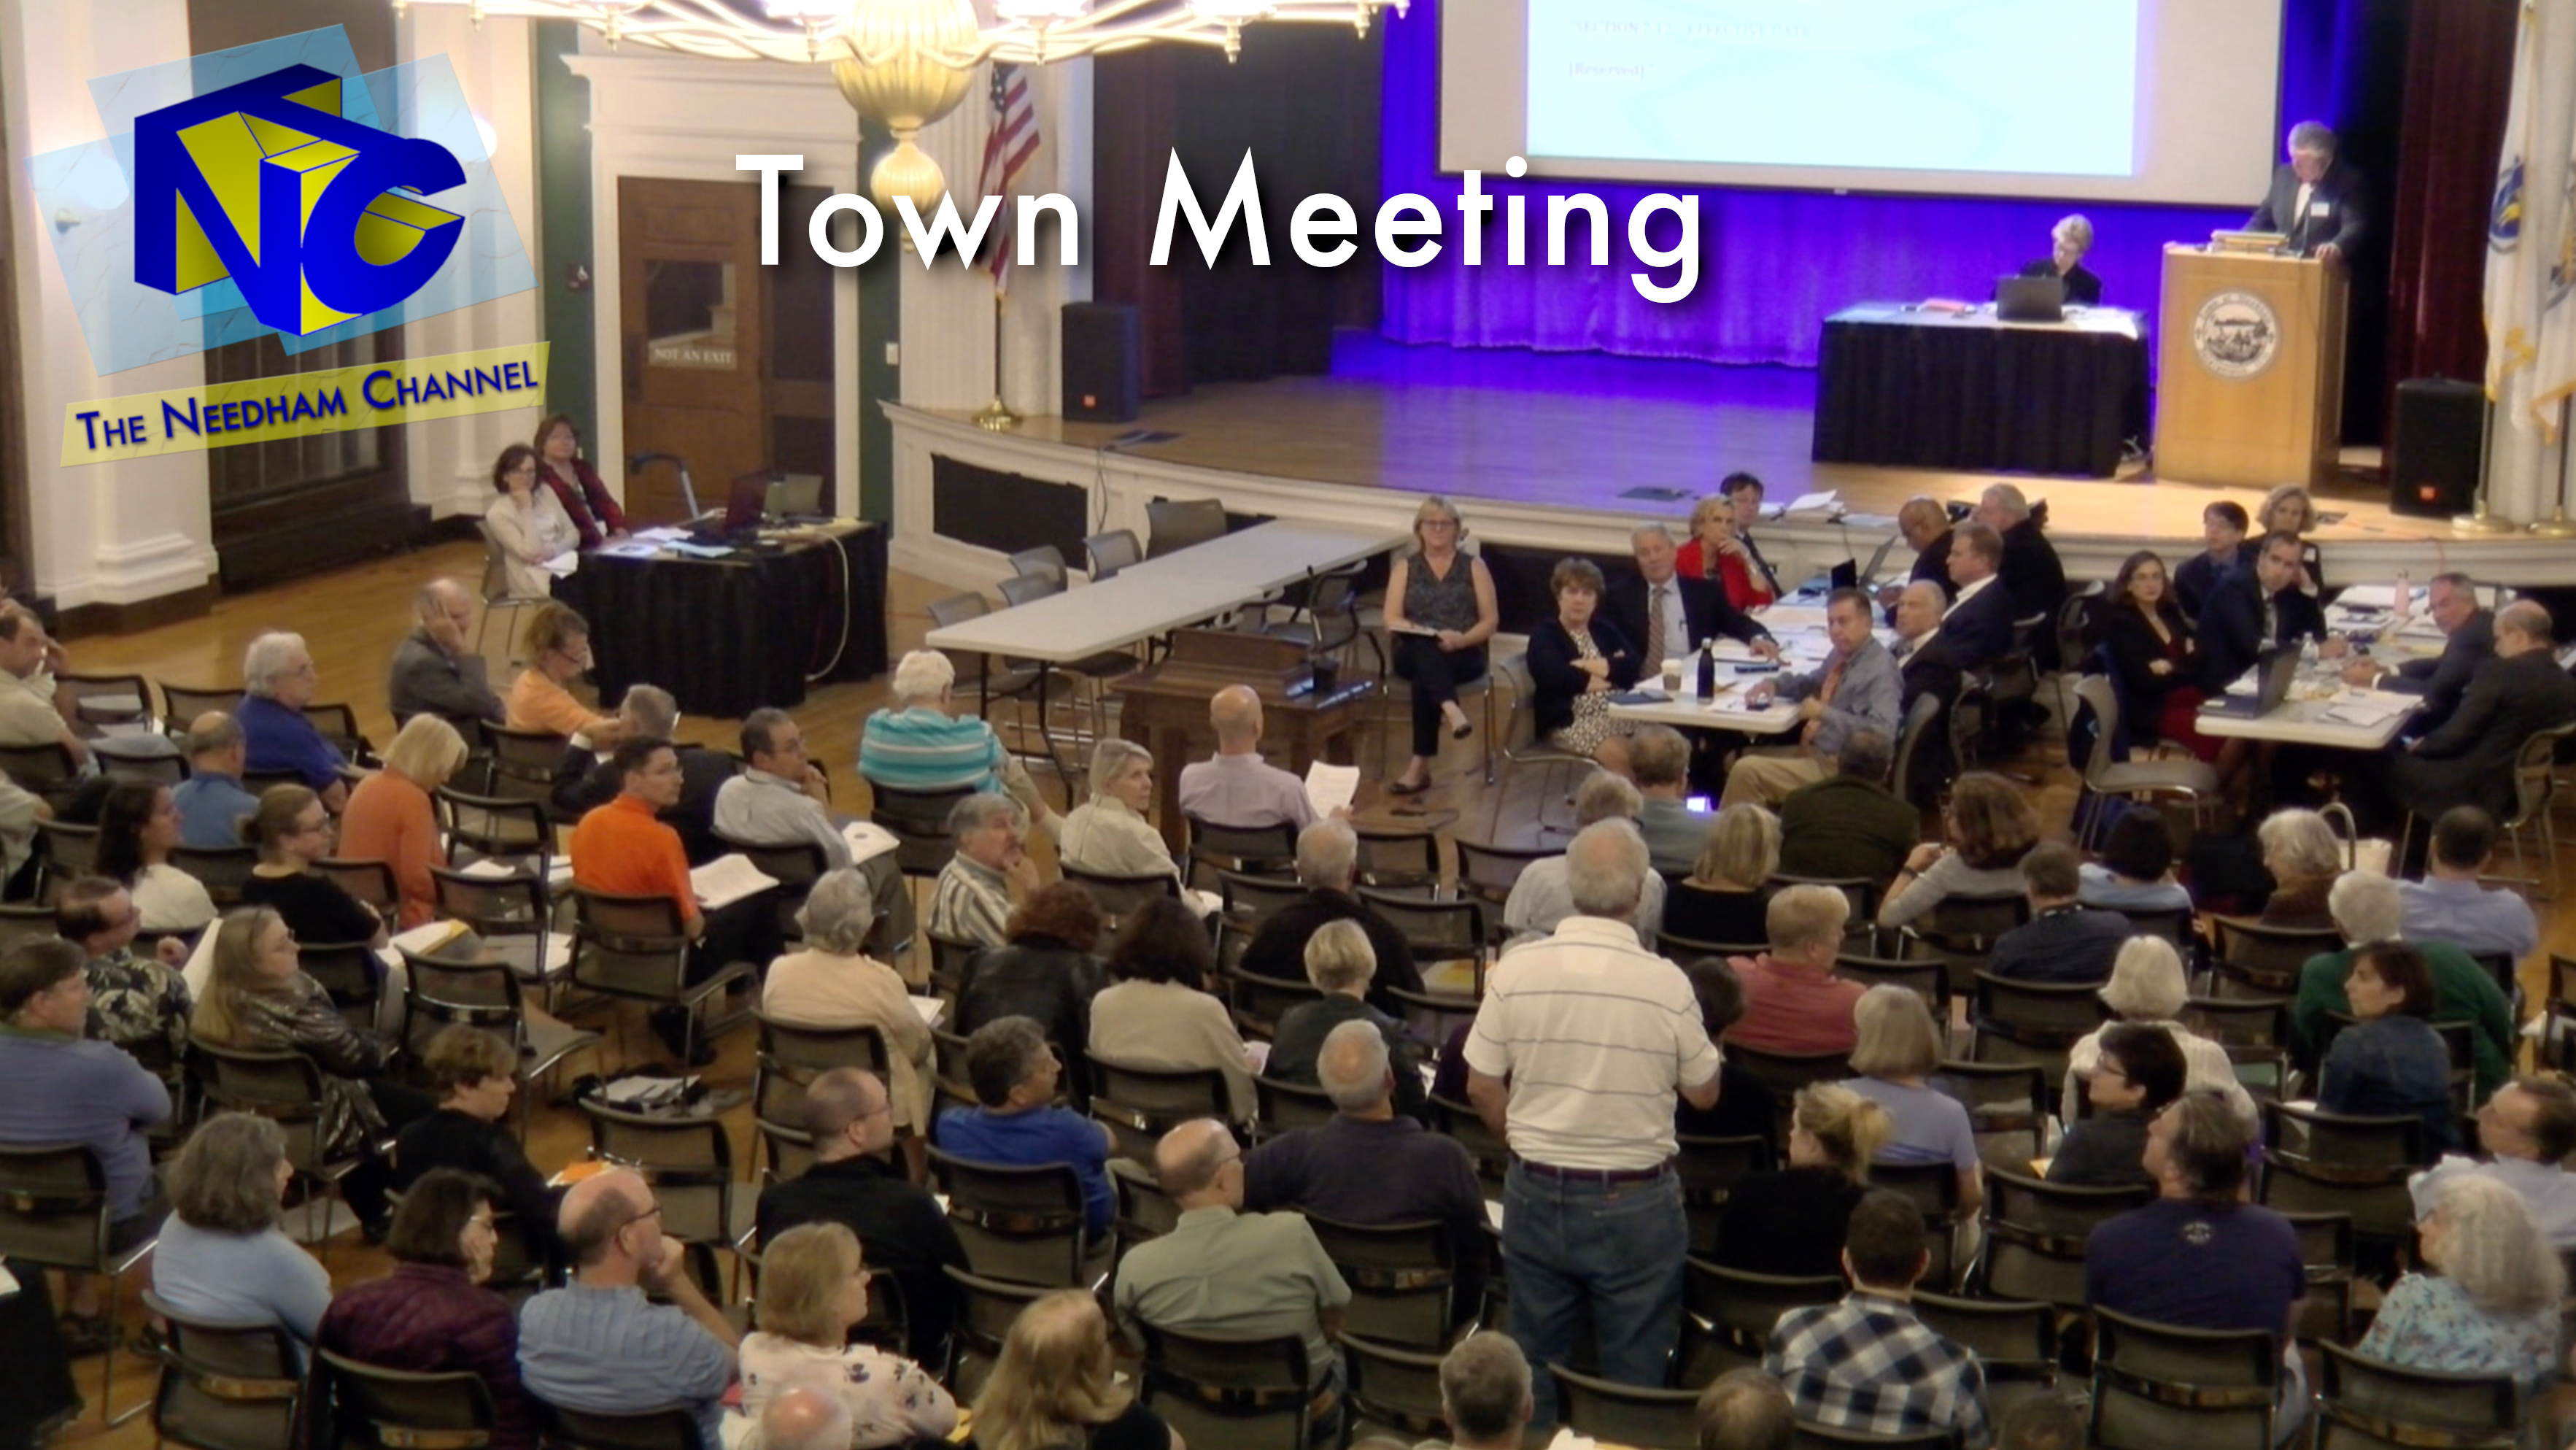 Town Meeting – The Needham Channel